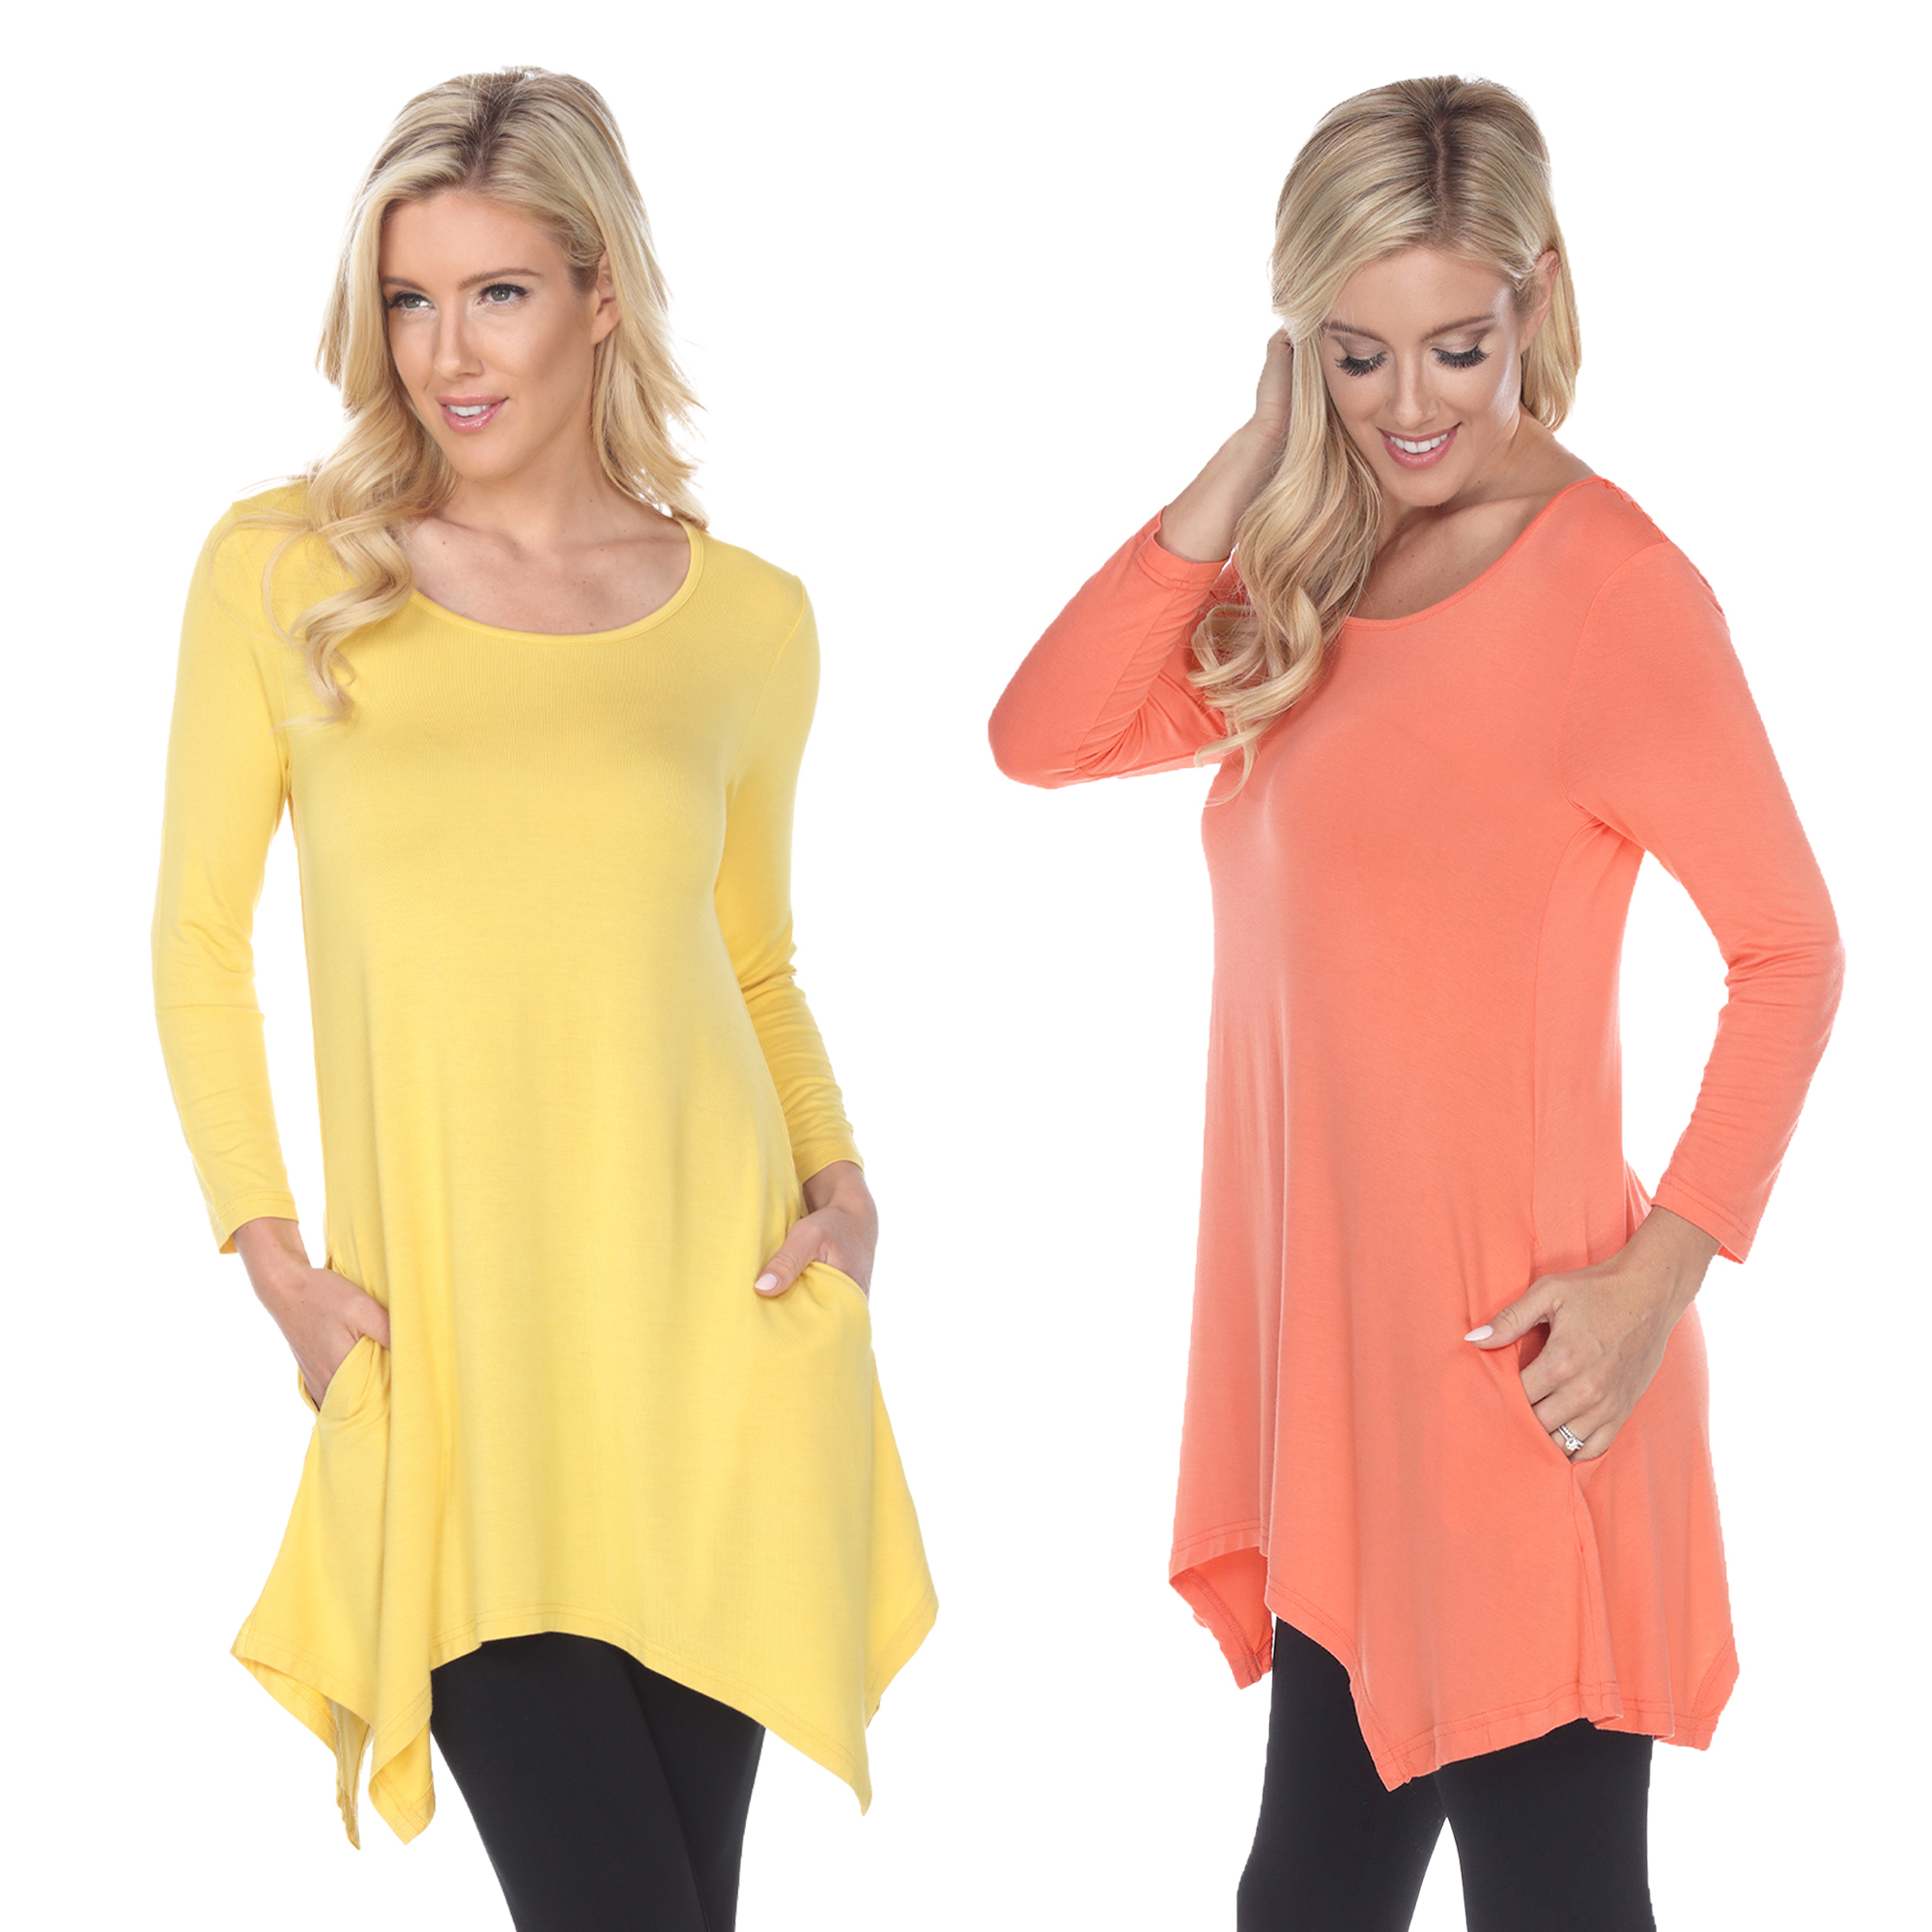 White Mark Women's Pack Of 2 Yellow Tunic Top - Yellow, Coral, Small